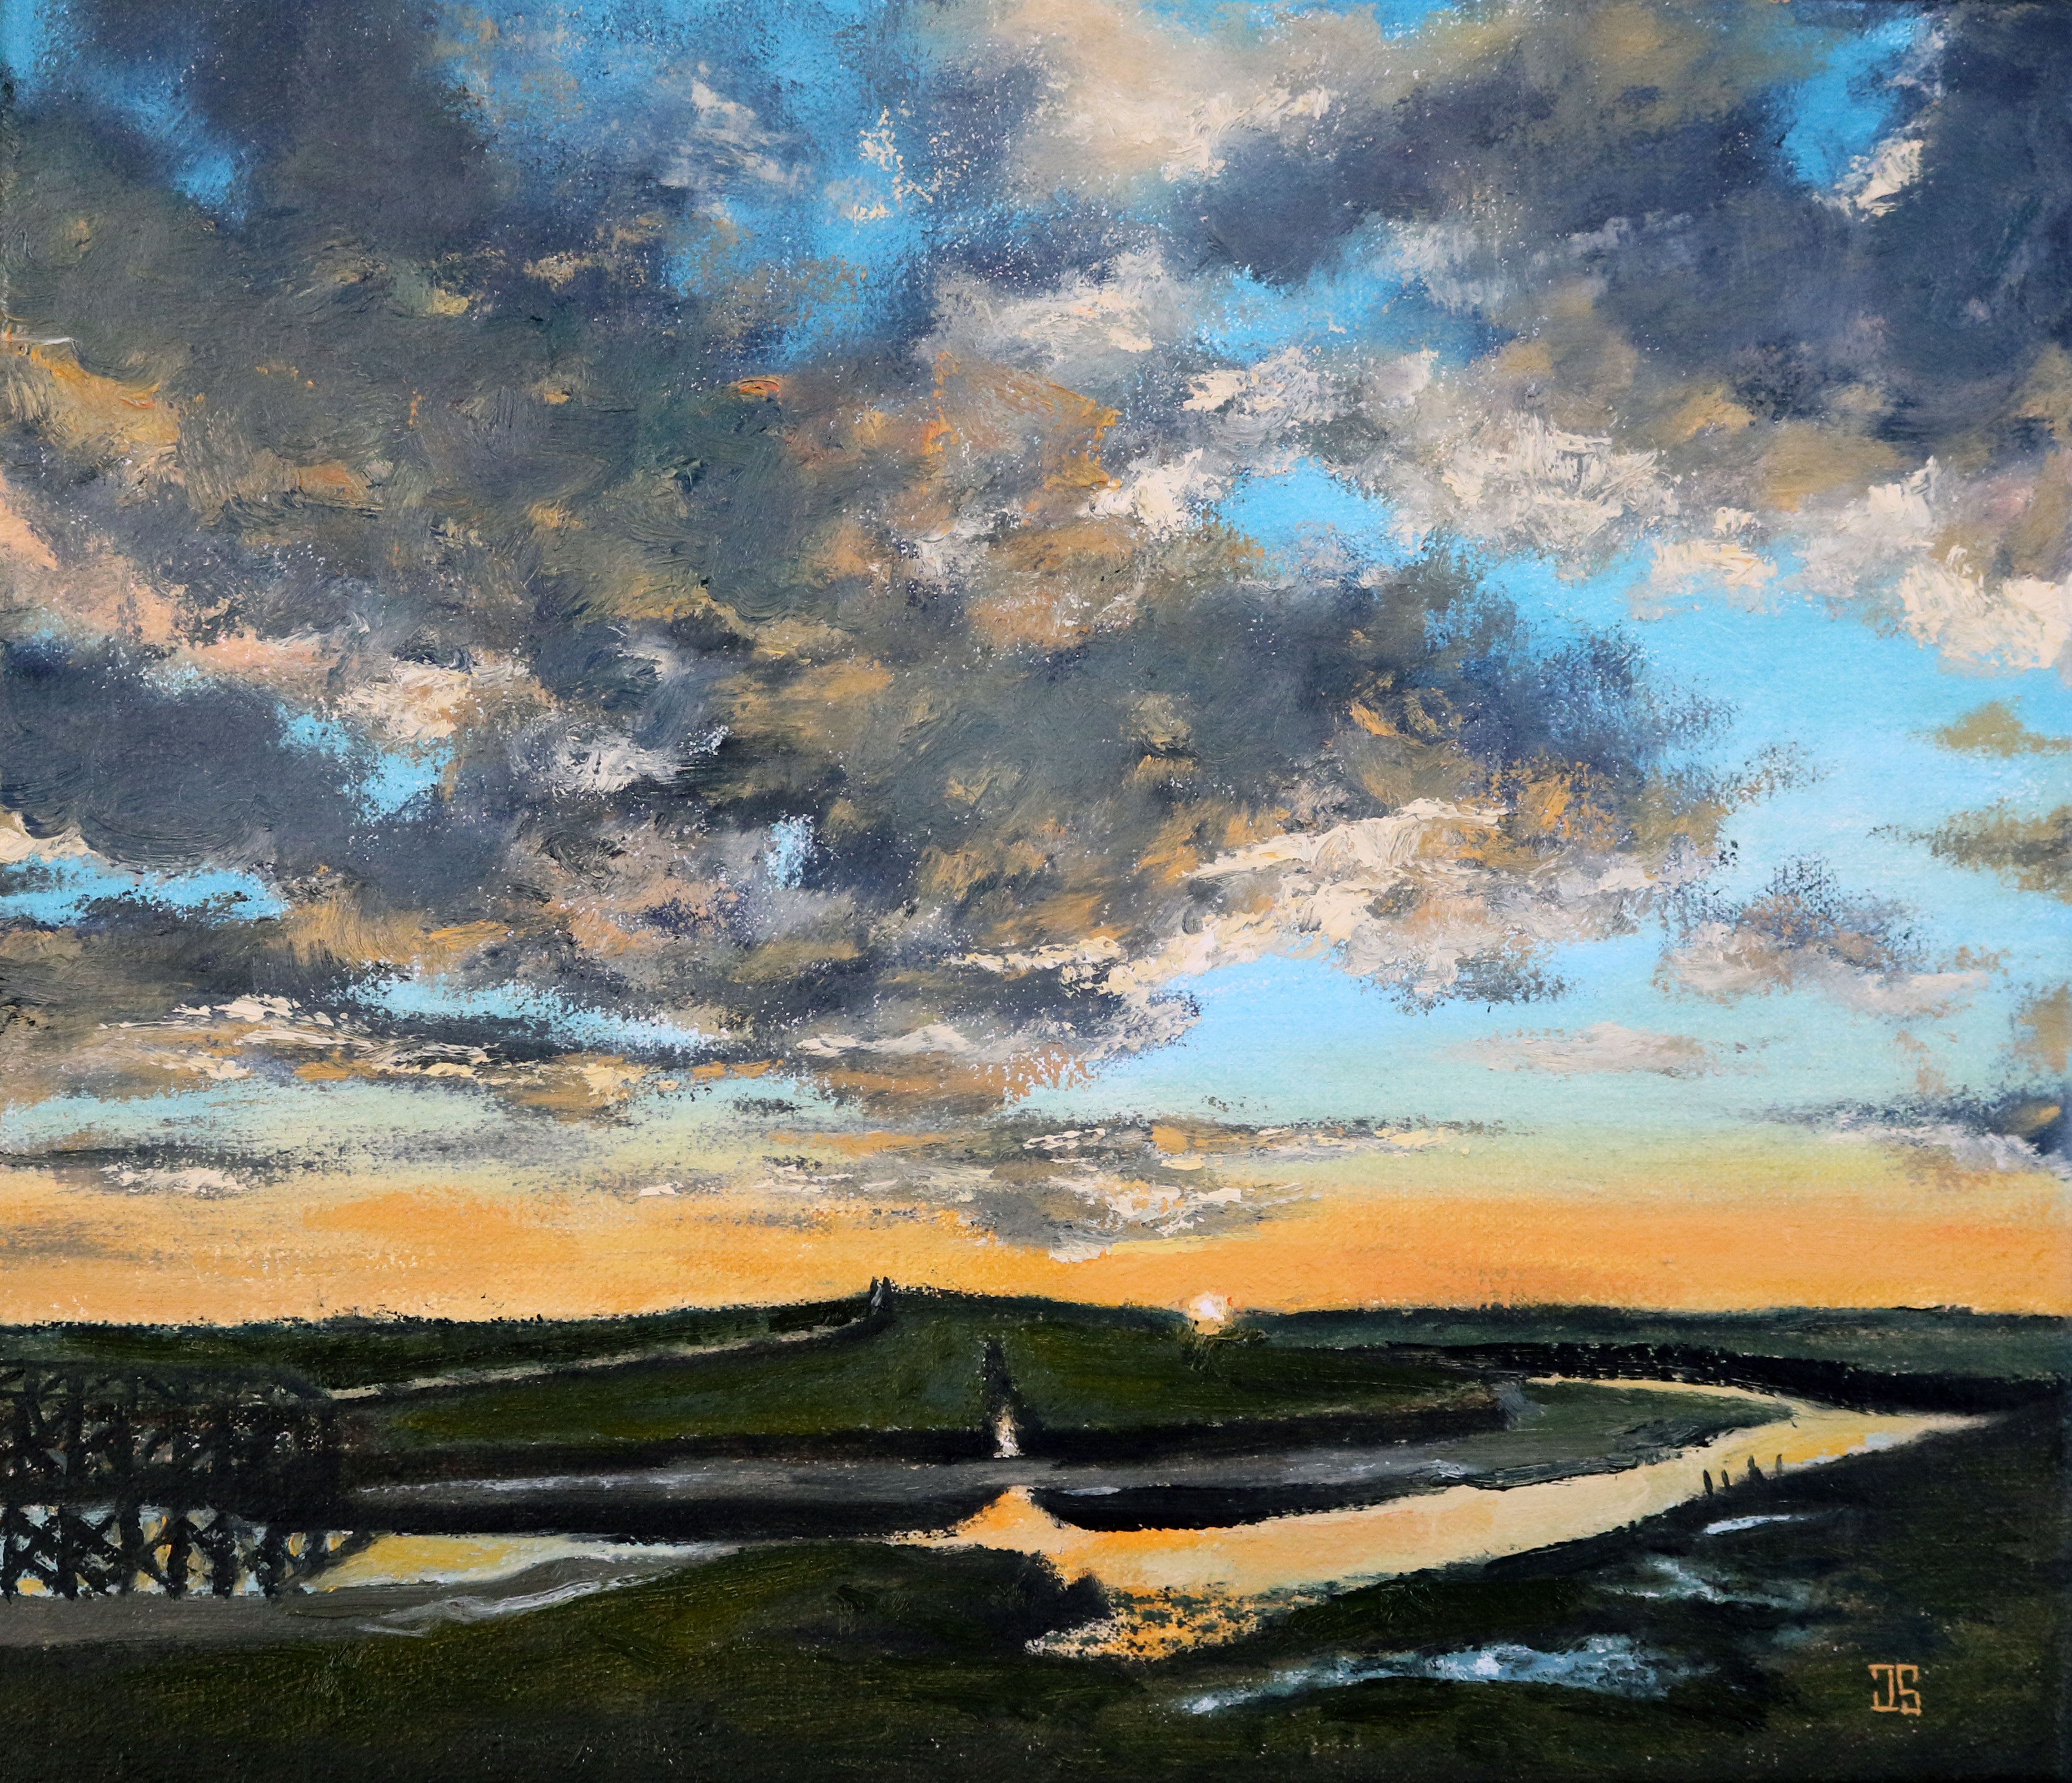 Oil painting "Sunrise on the Marsh" by Jeffrey Dale Starr